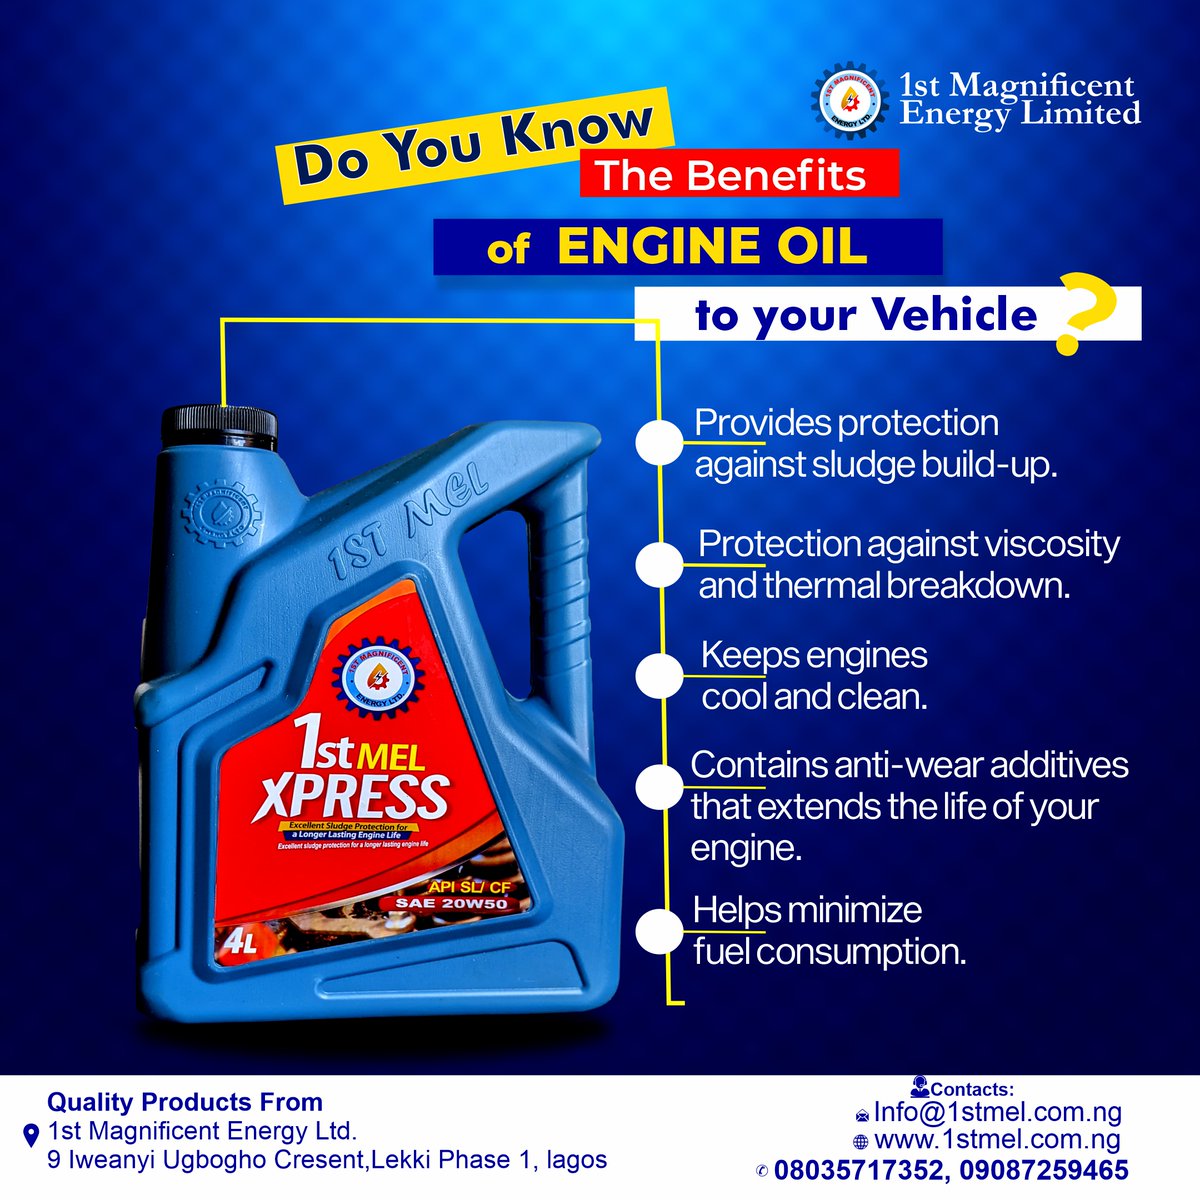 Do you know the benefits engine oil to your vehicles?
.
.
.
#1stmel #engineoil #engineoils #engineoilservice #Benefits #lubes #lubricant #lubricants #lubrication #doyouknow #carservice #carmaintenance #CarMaintenanceMadeEasy #carmaintenancetips